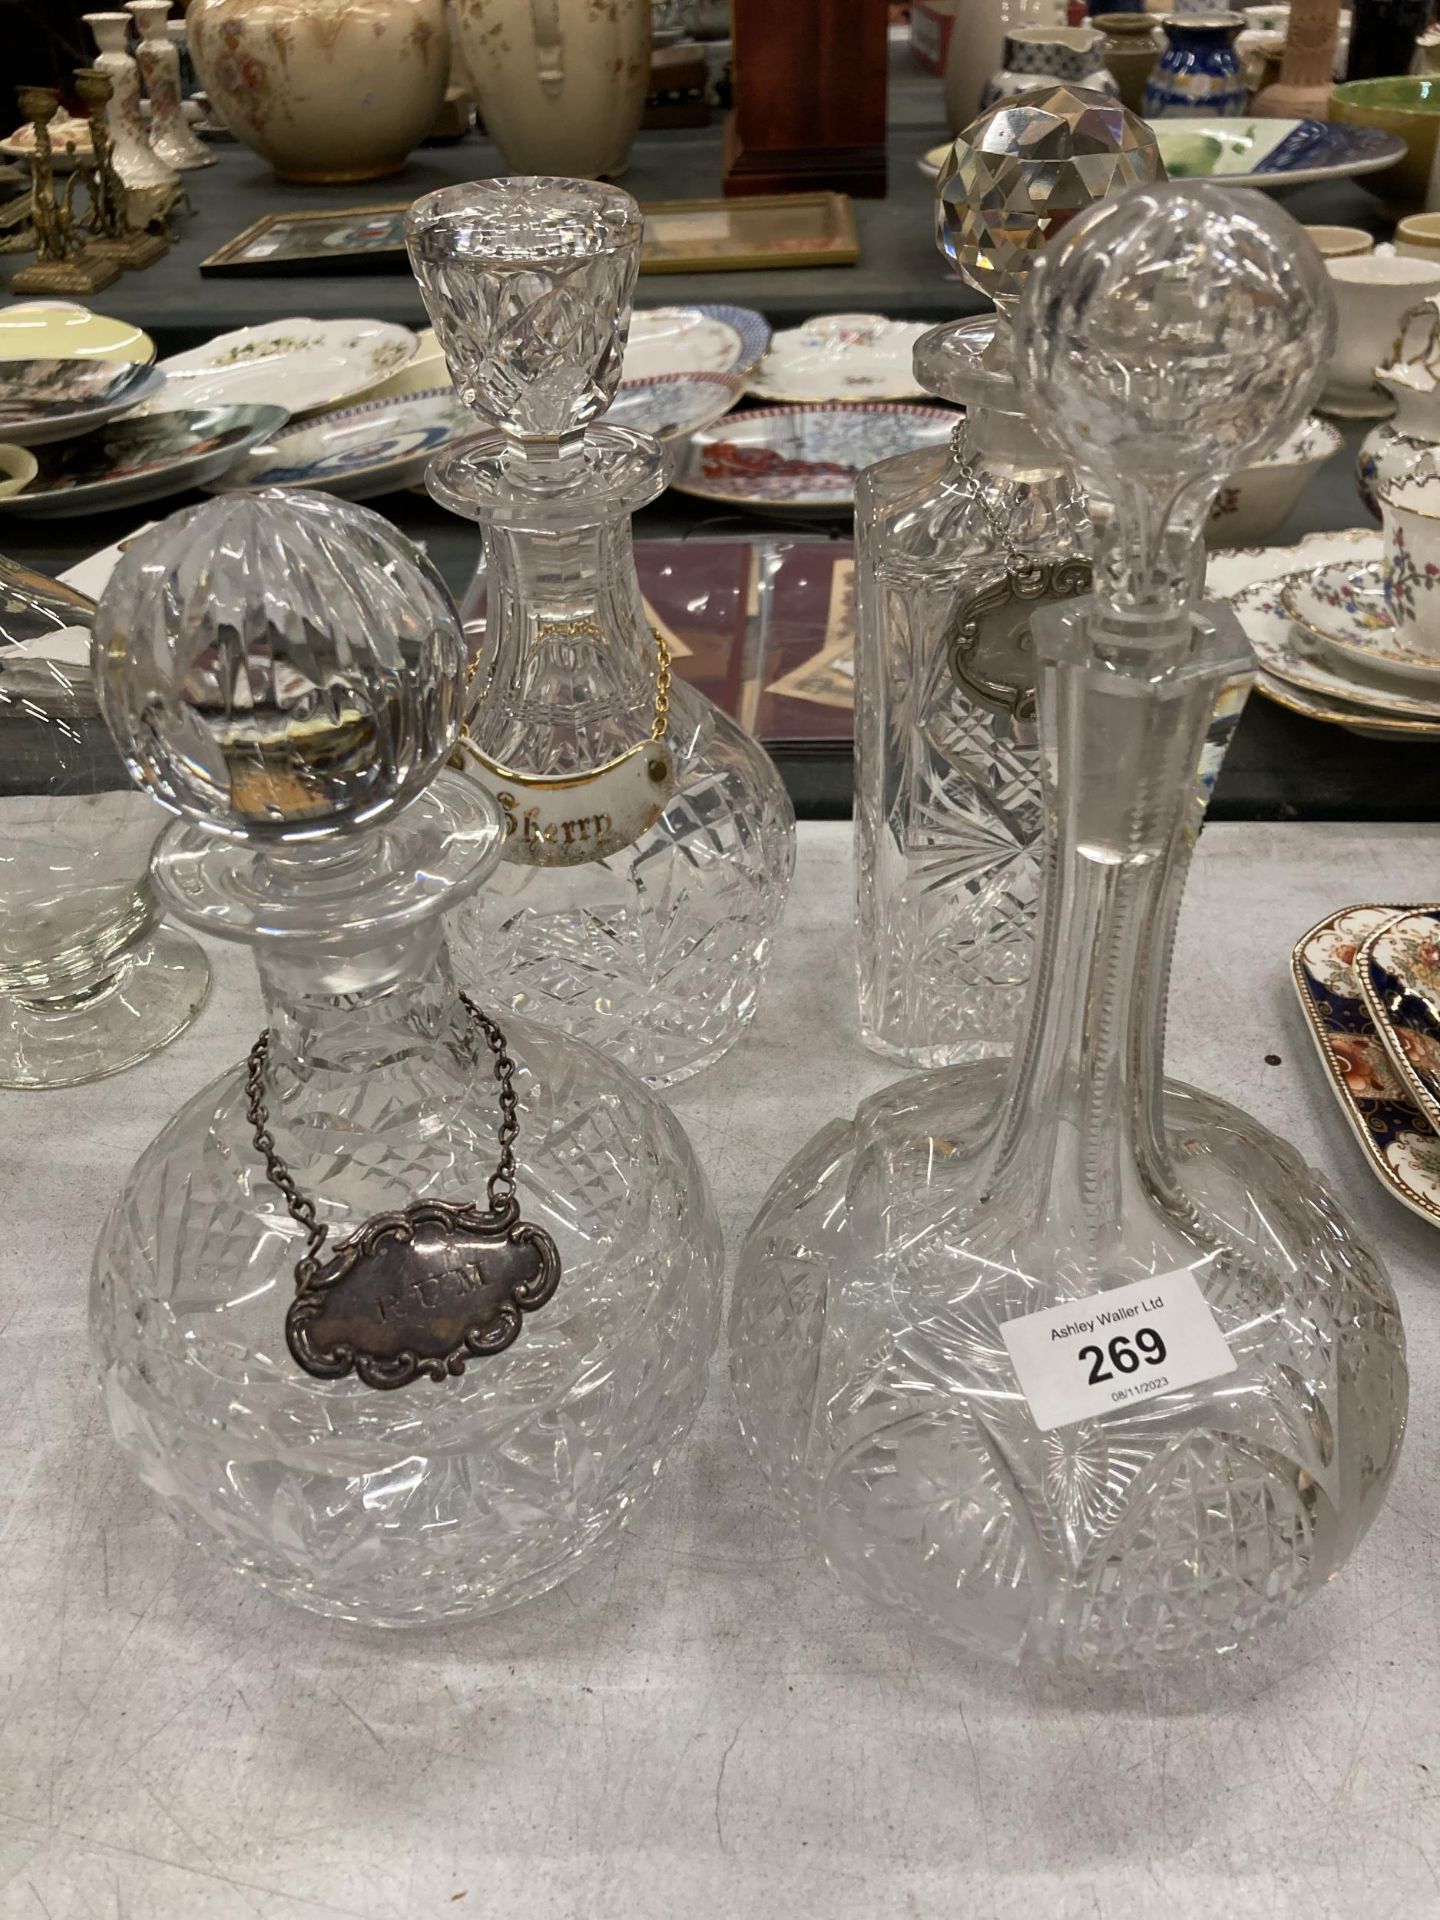 FOUR VINTAGE CUT GLASS DECANTERS WITH THREE DECANTER LABELS - TWO BEING SILVER PLATE - Image 3 of 3